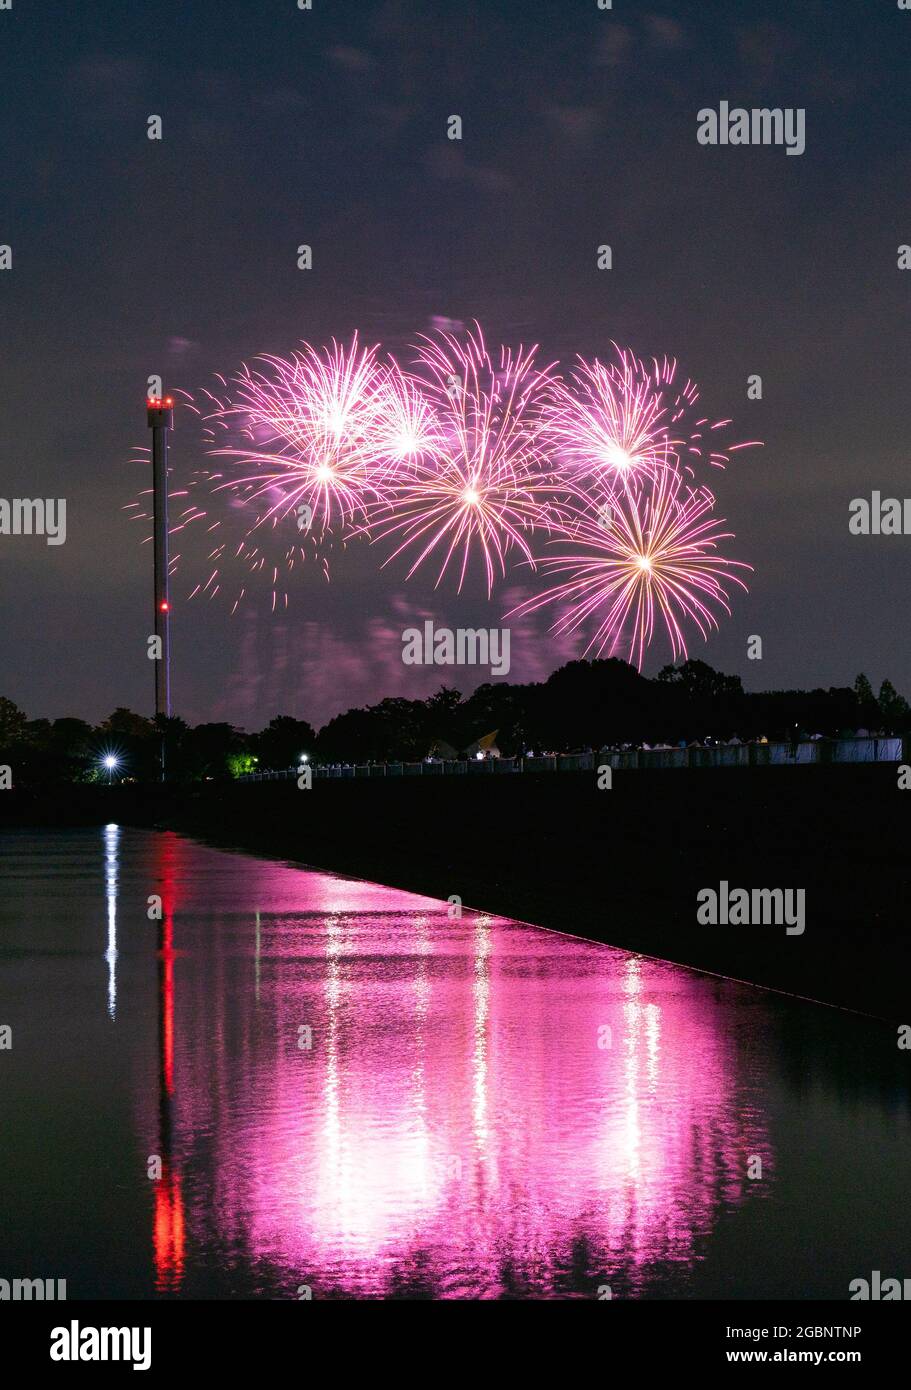 Beautiful Fireworks Celebration In Japan | Summer Season Night Festival | Near The Lake | No People  | Firework With Colourful Shadow Stock Photo